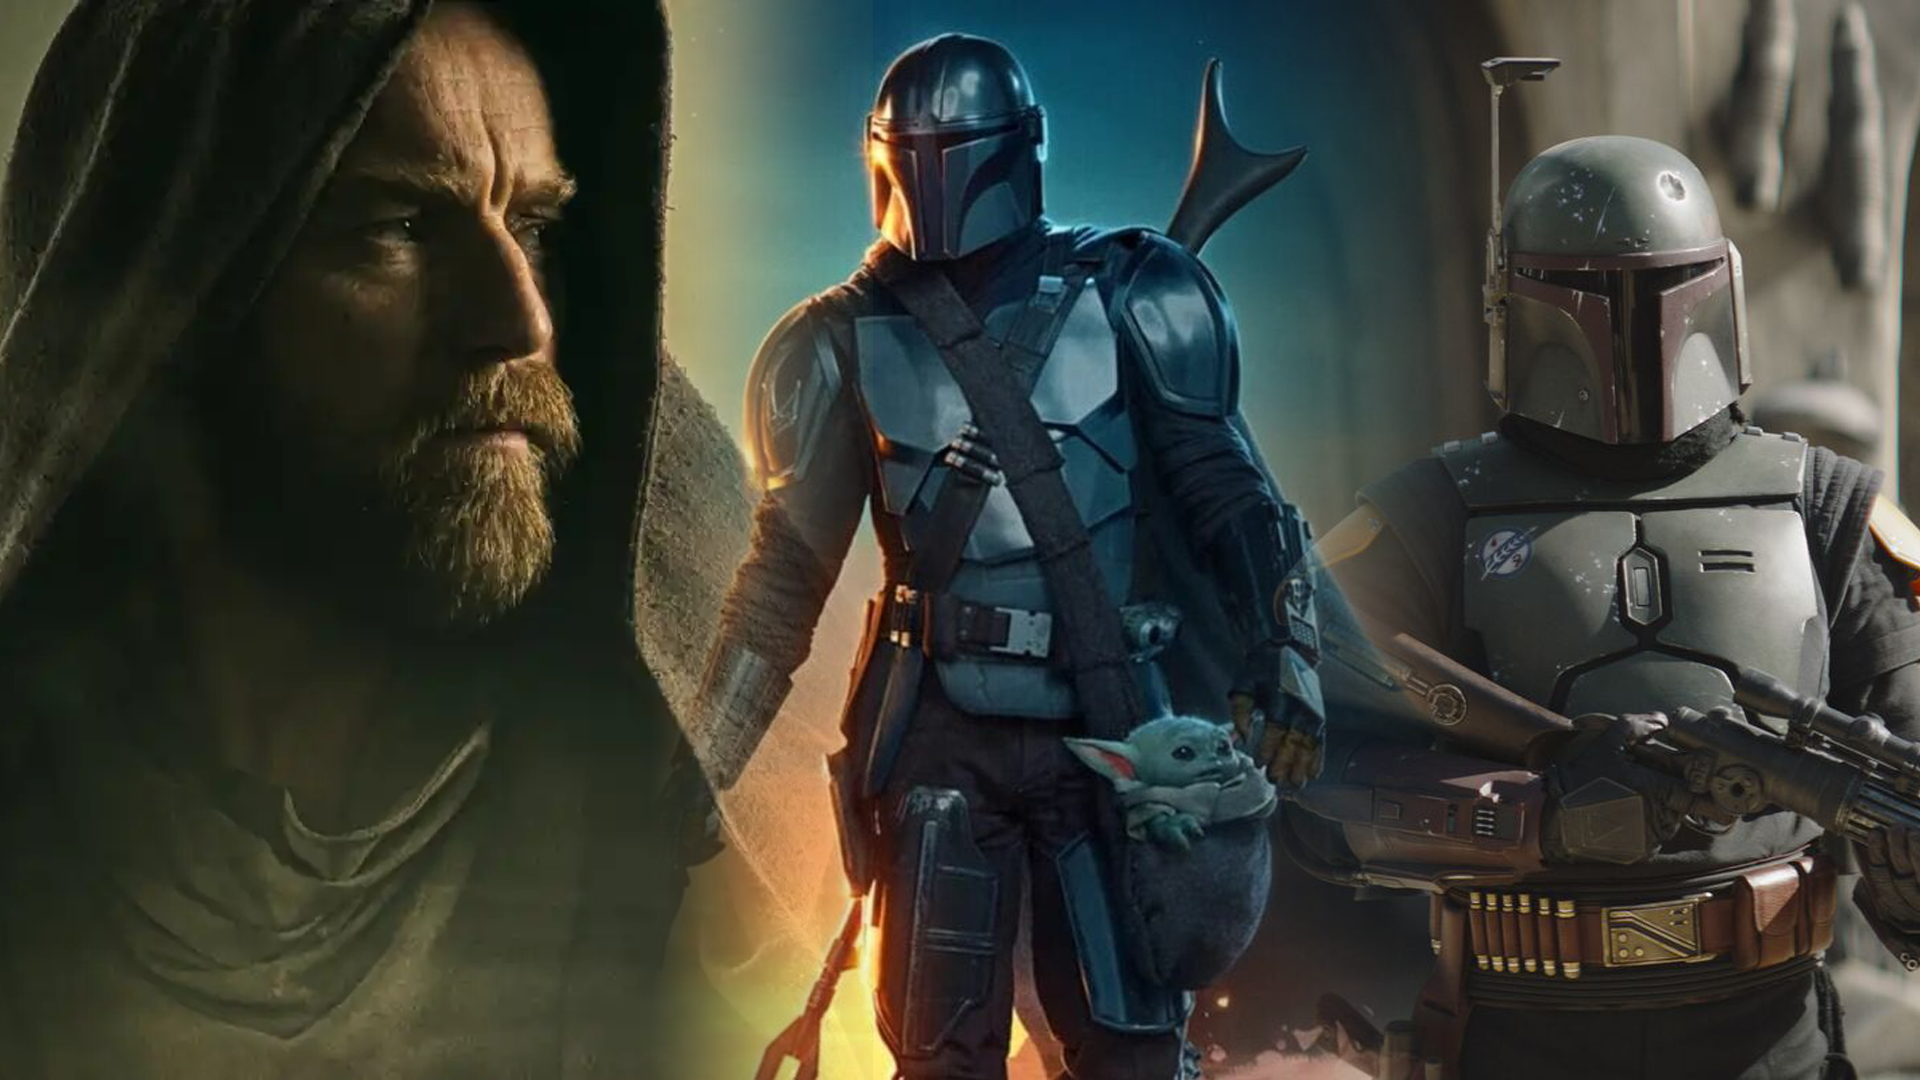 The Last Jedi' To 'The Mandalorian', May The Force Be With You With These 'Star  Wars' Titles